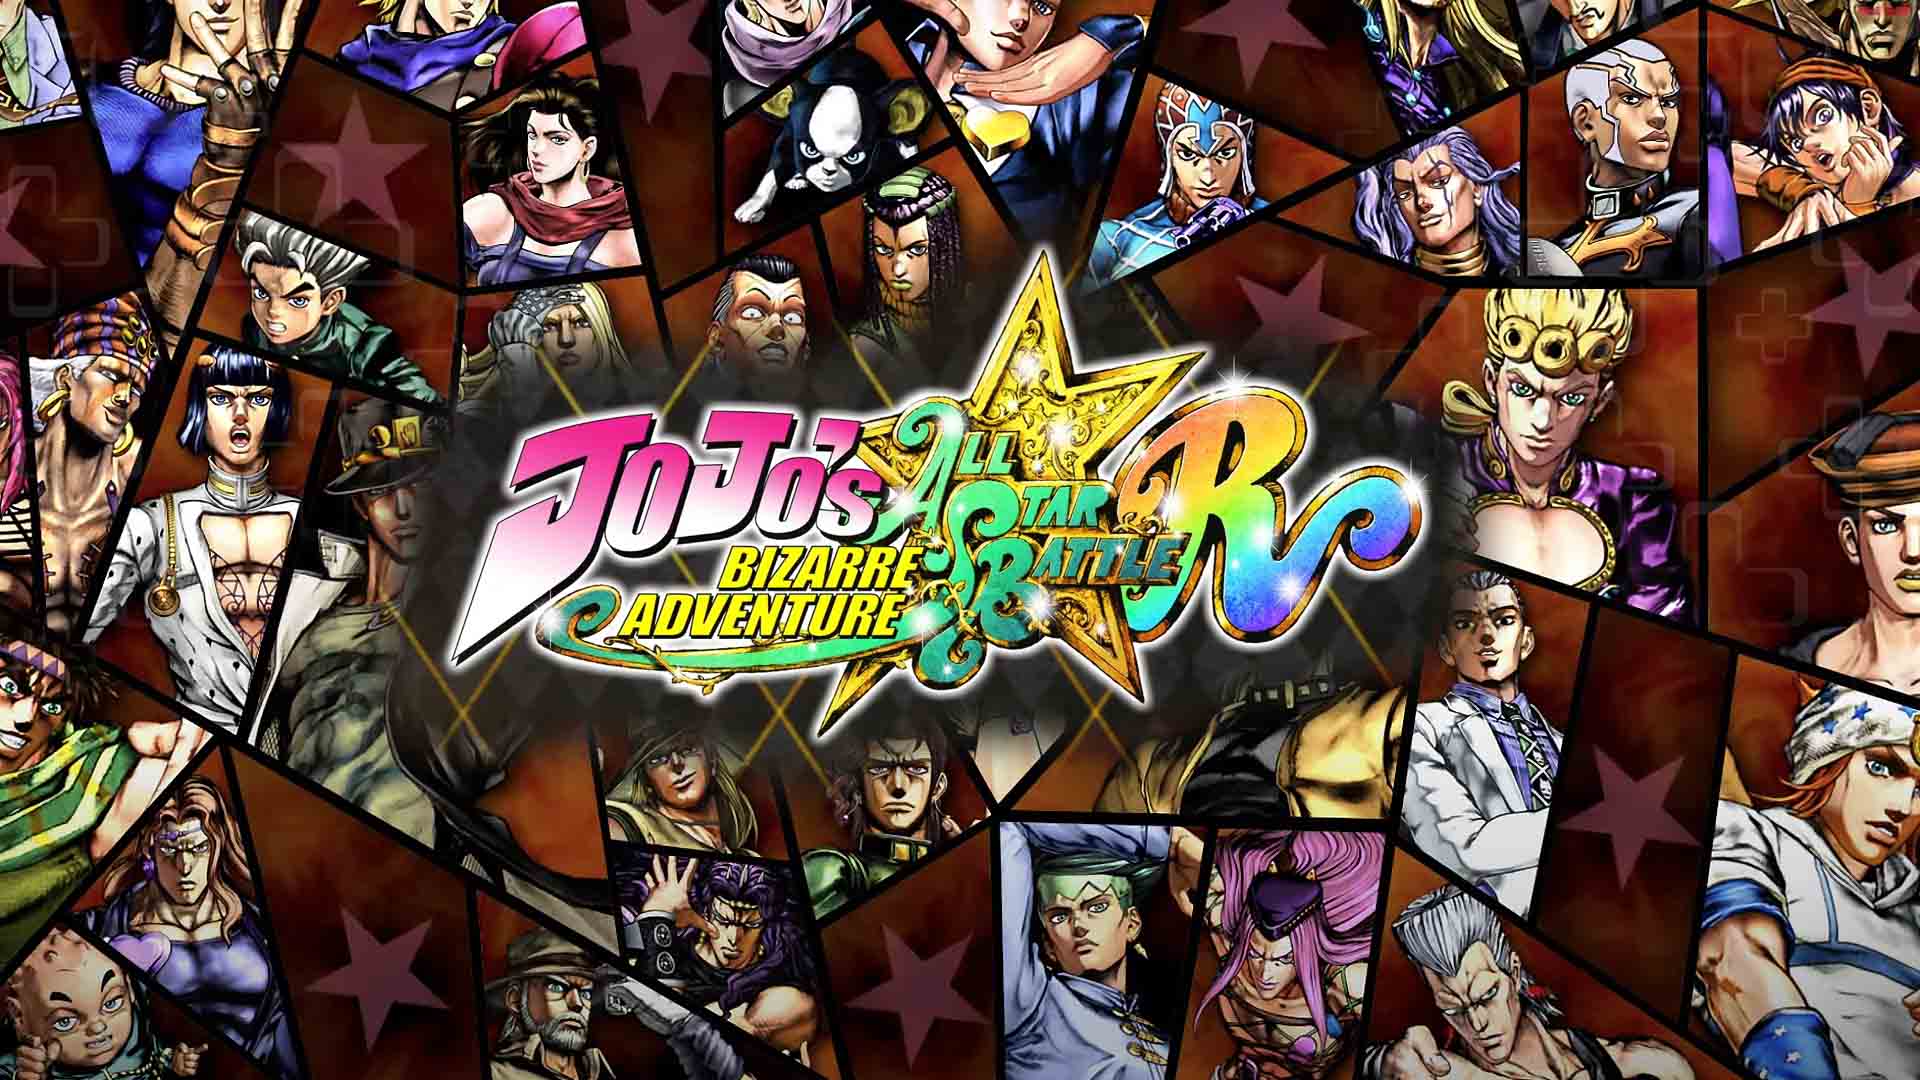 JoJo's Bizarre Adventure: All Star Battle R approaches Switch this Fall